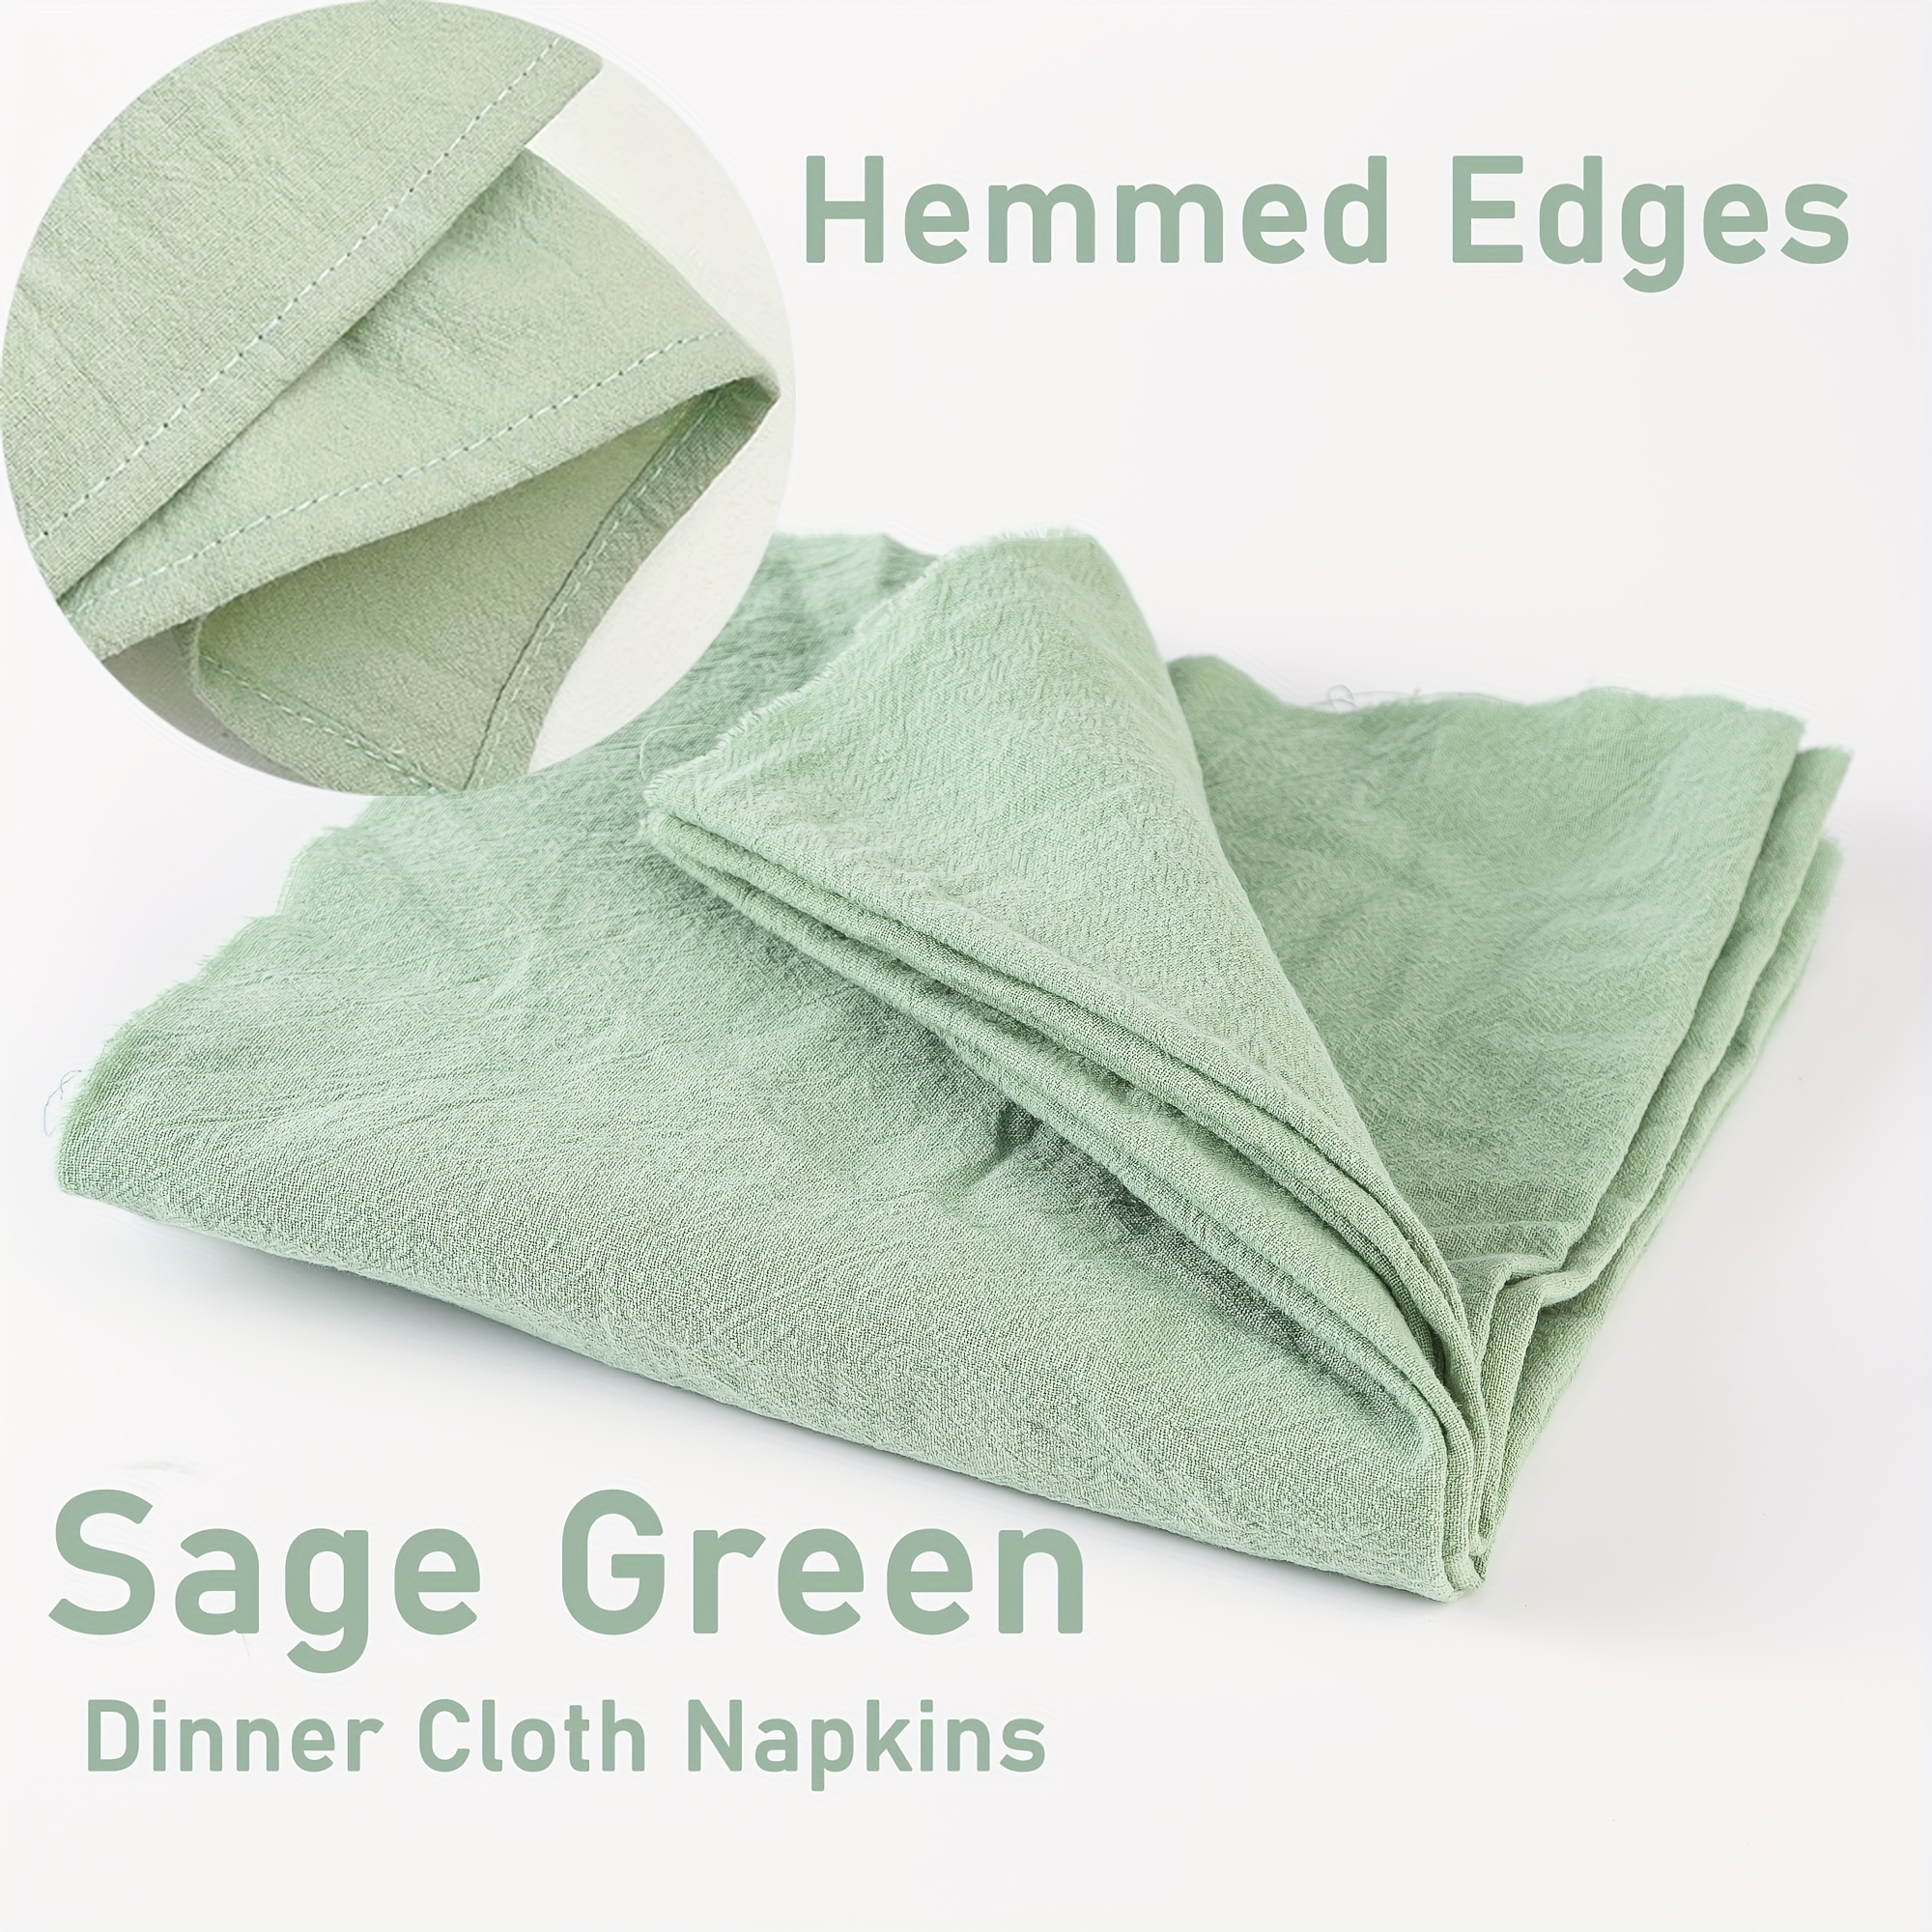 

6pcs/12pcs 100% Cotton Sage Green Dinner Cloth Napkins Square Solid Color Knit Fabric For Christmas